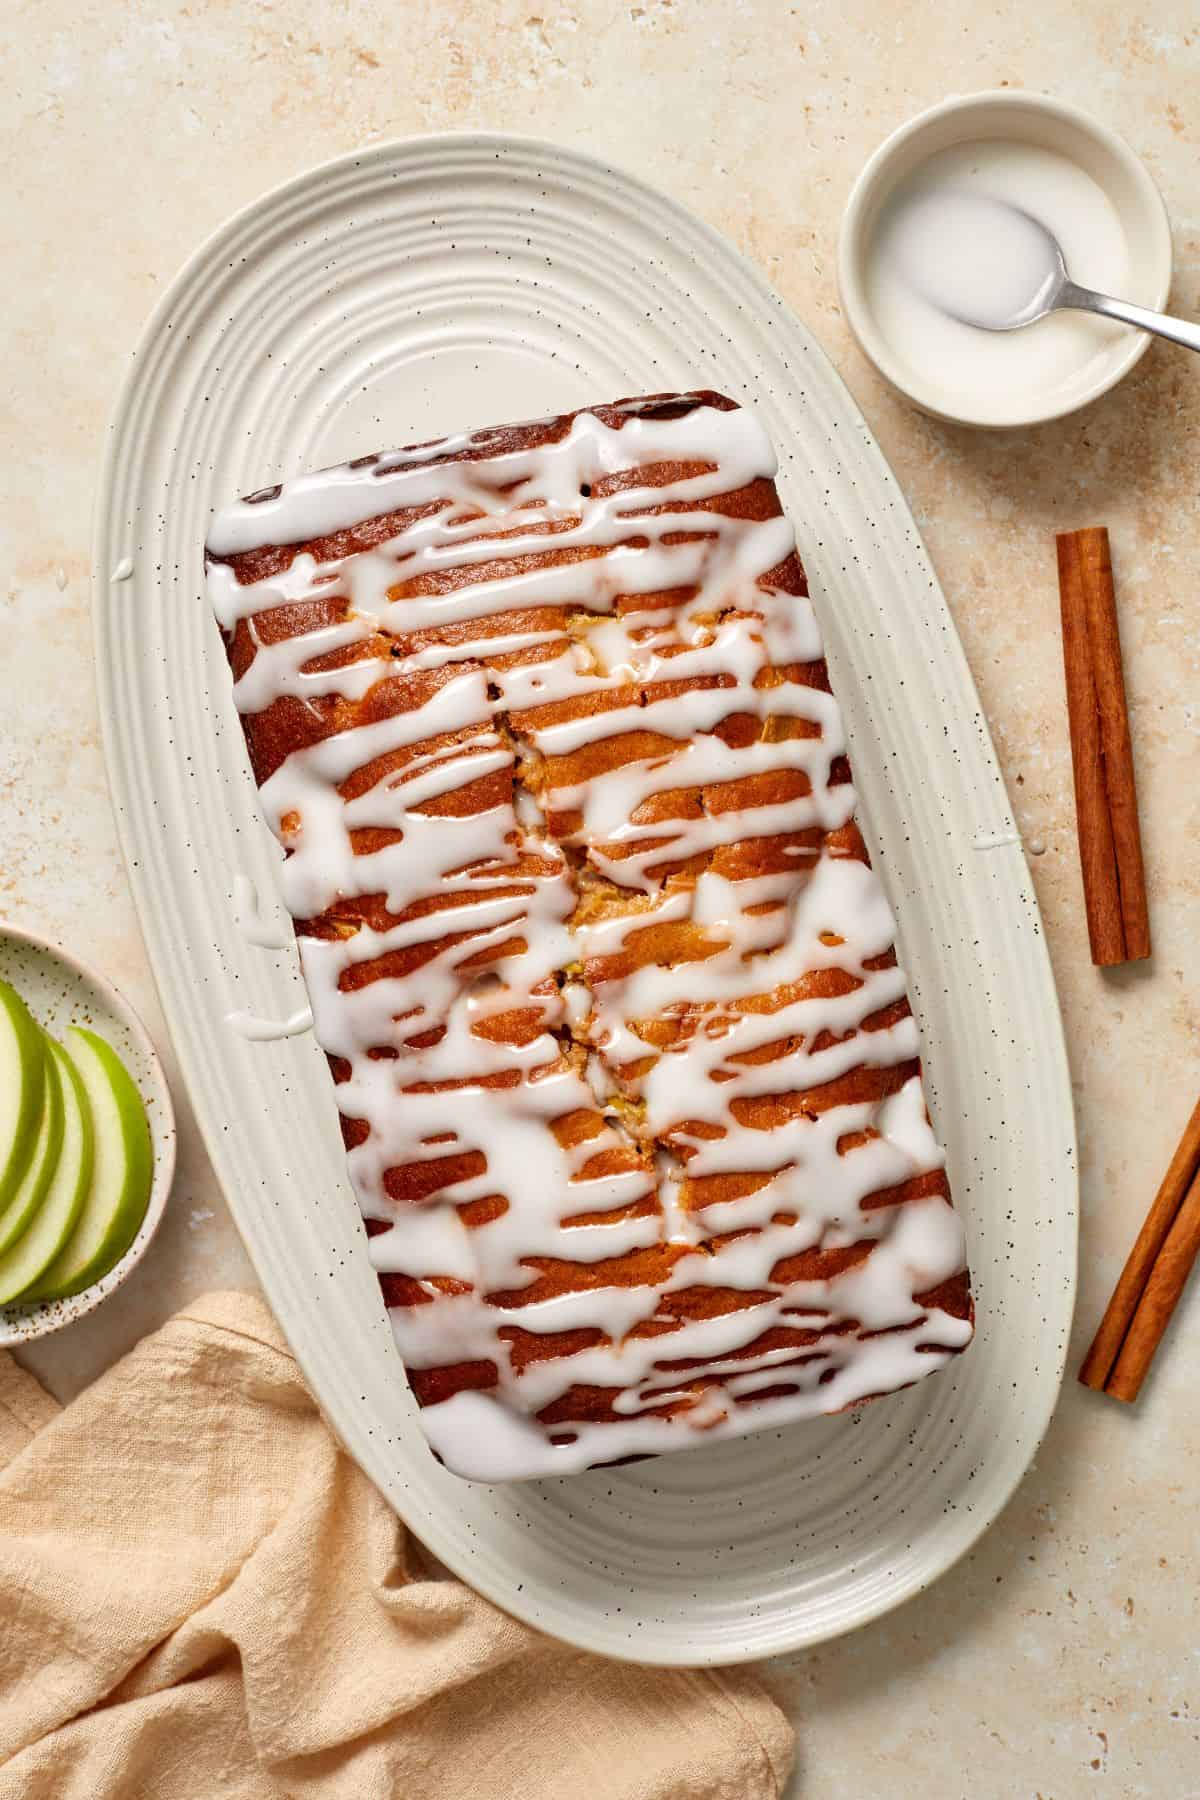 Whole Apple Loaf Cake, sitting on a white oval platter, with a knife on the side.